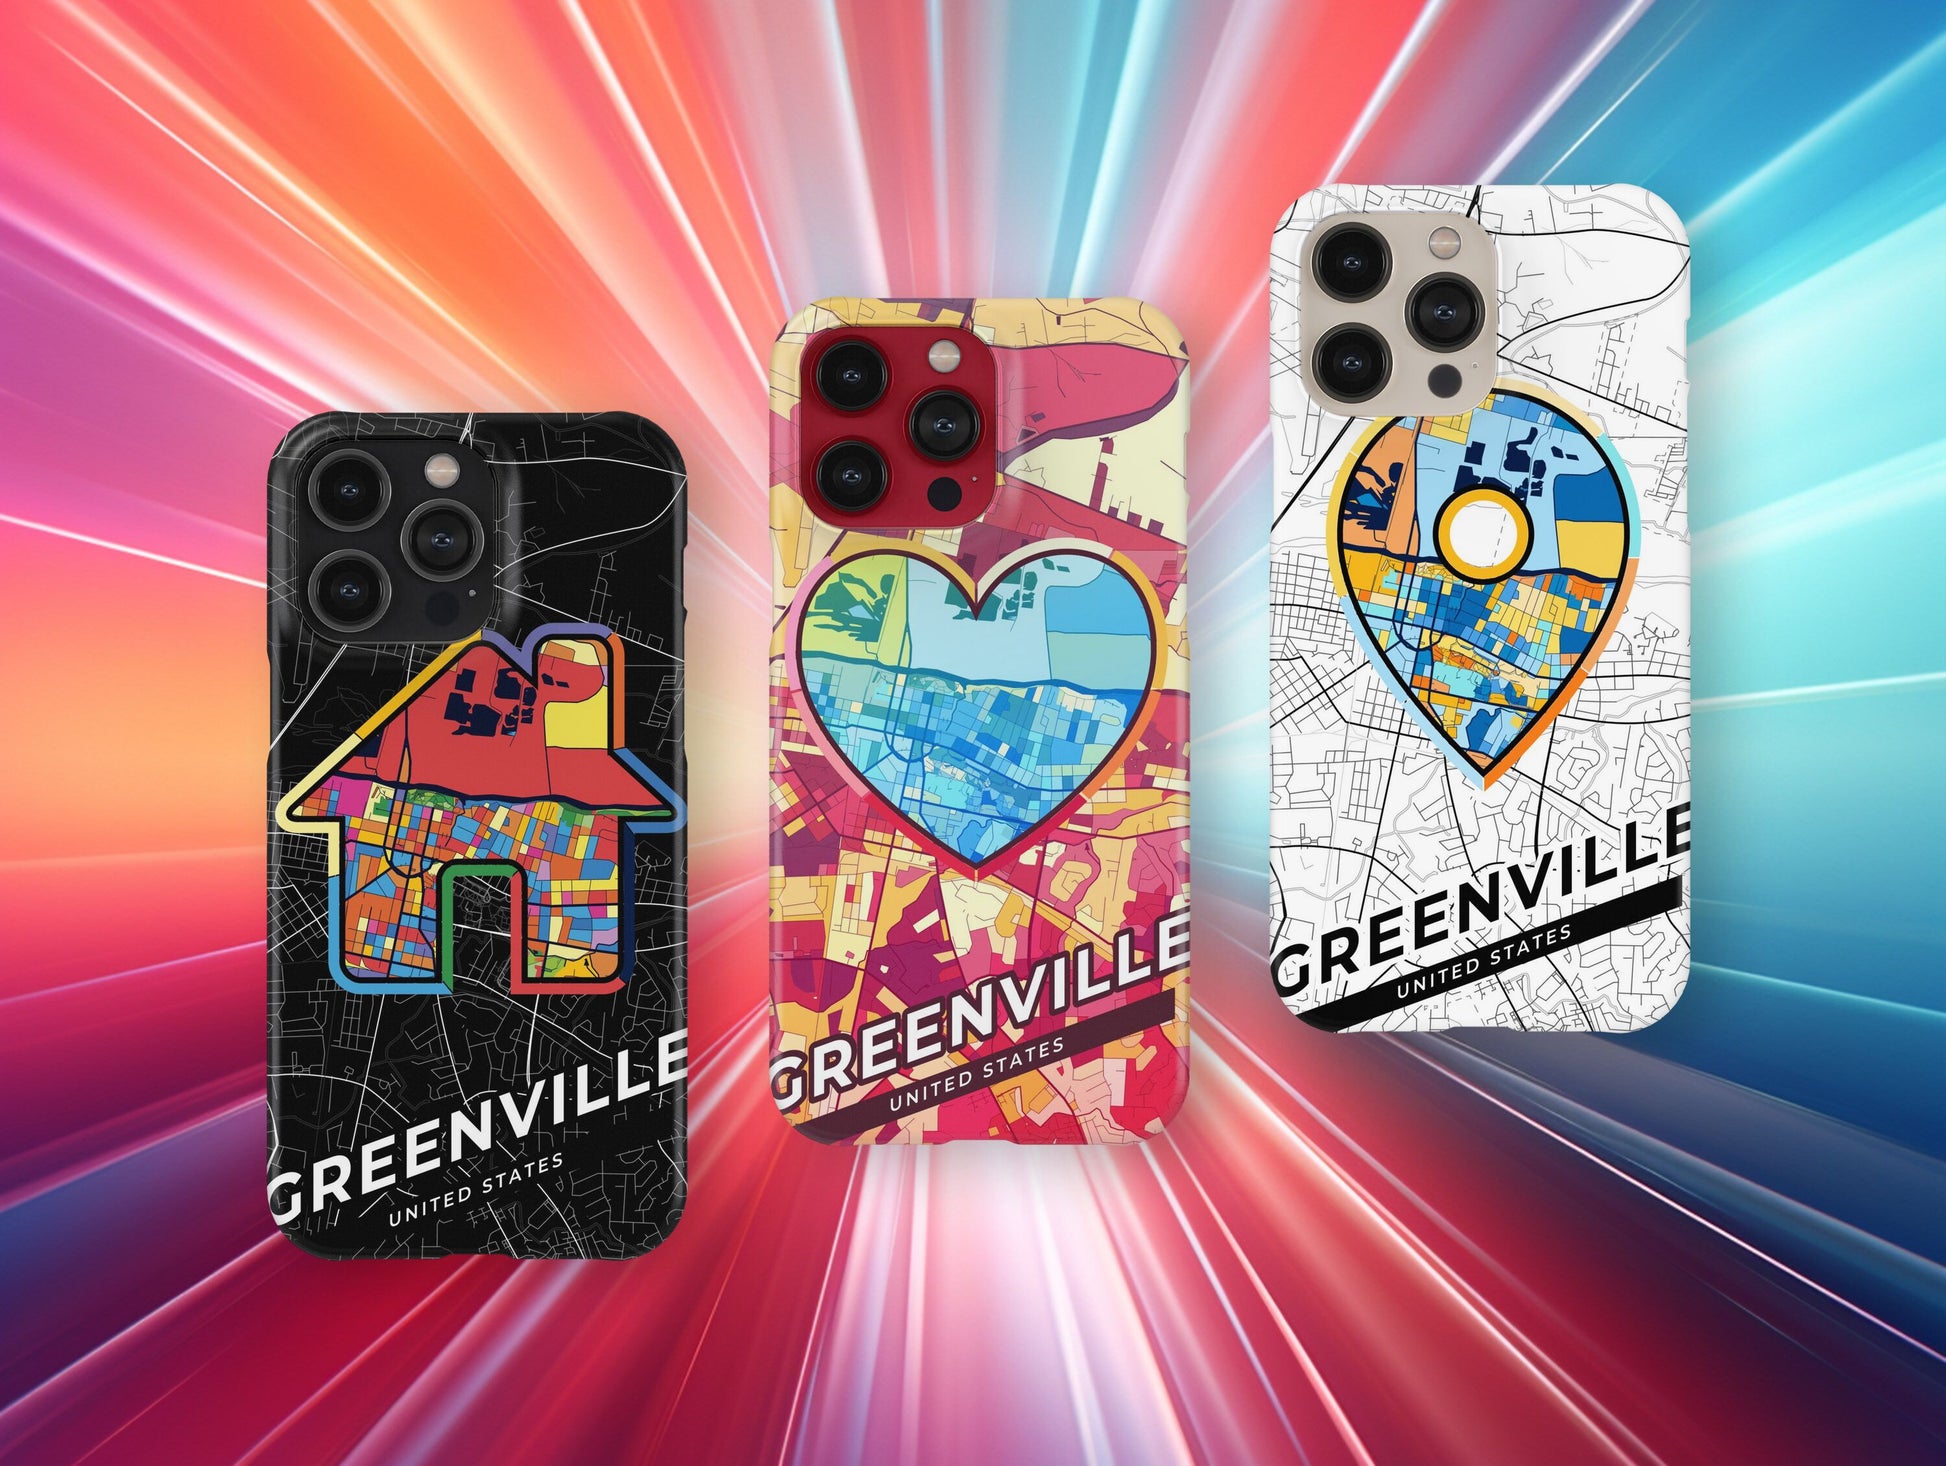 Greenville North Carolina slim phone case with colorful icon. Birthday, wedding or housewarming gift. Couple match cases.